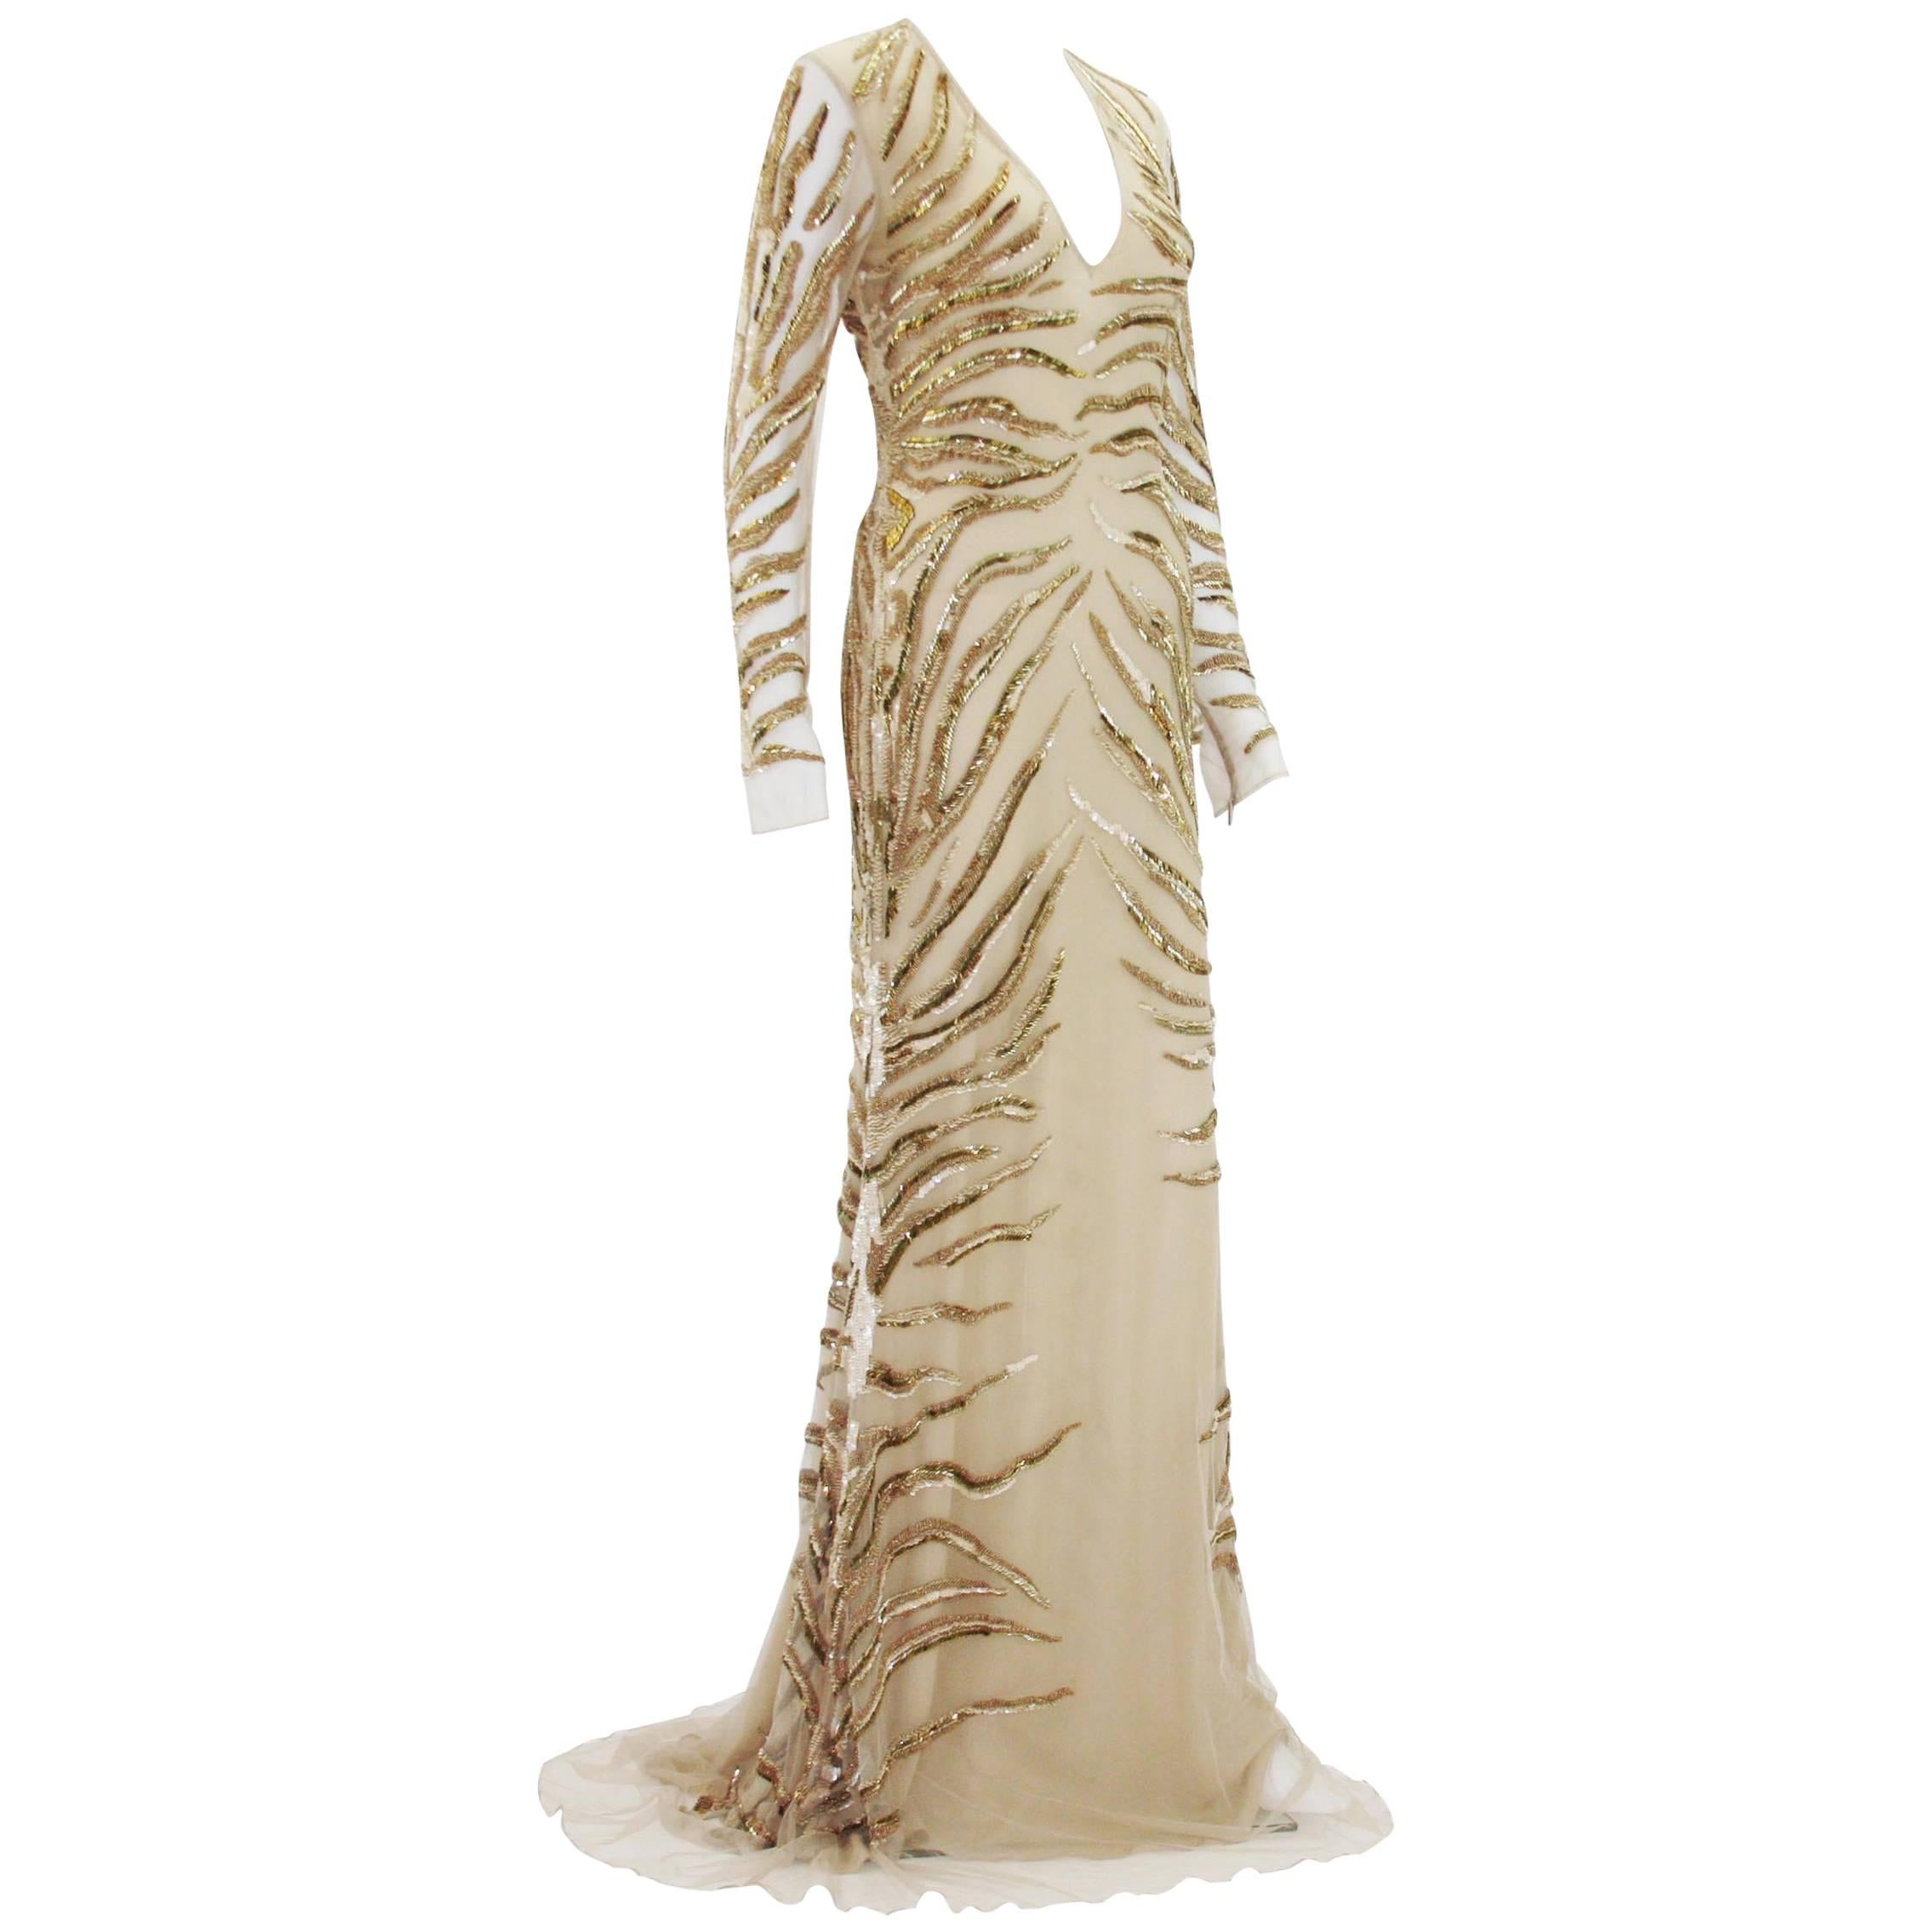 New Roberto Cavalli Nude Beaded Embroidery Mesh Dress Gown size 40